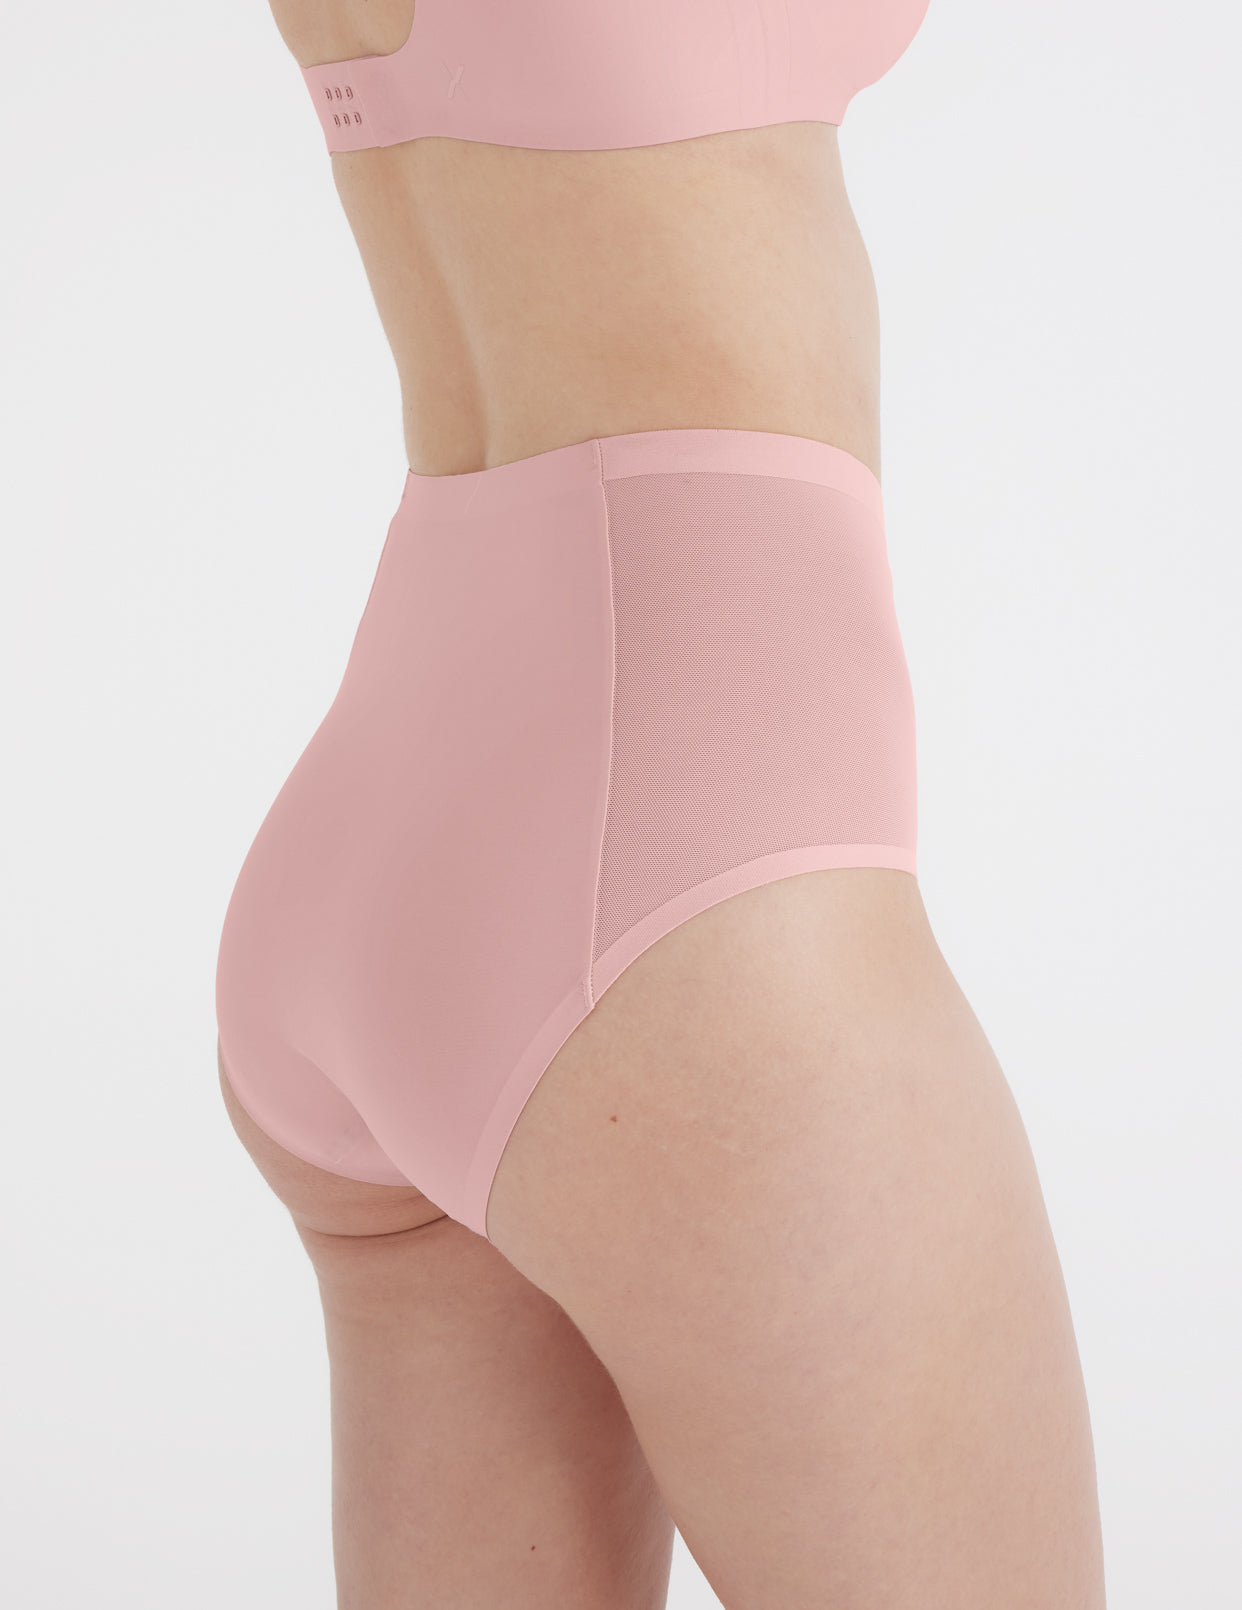 Seamless Full-Cut Incontinence Panties Review - Why I Love Them